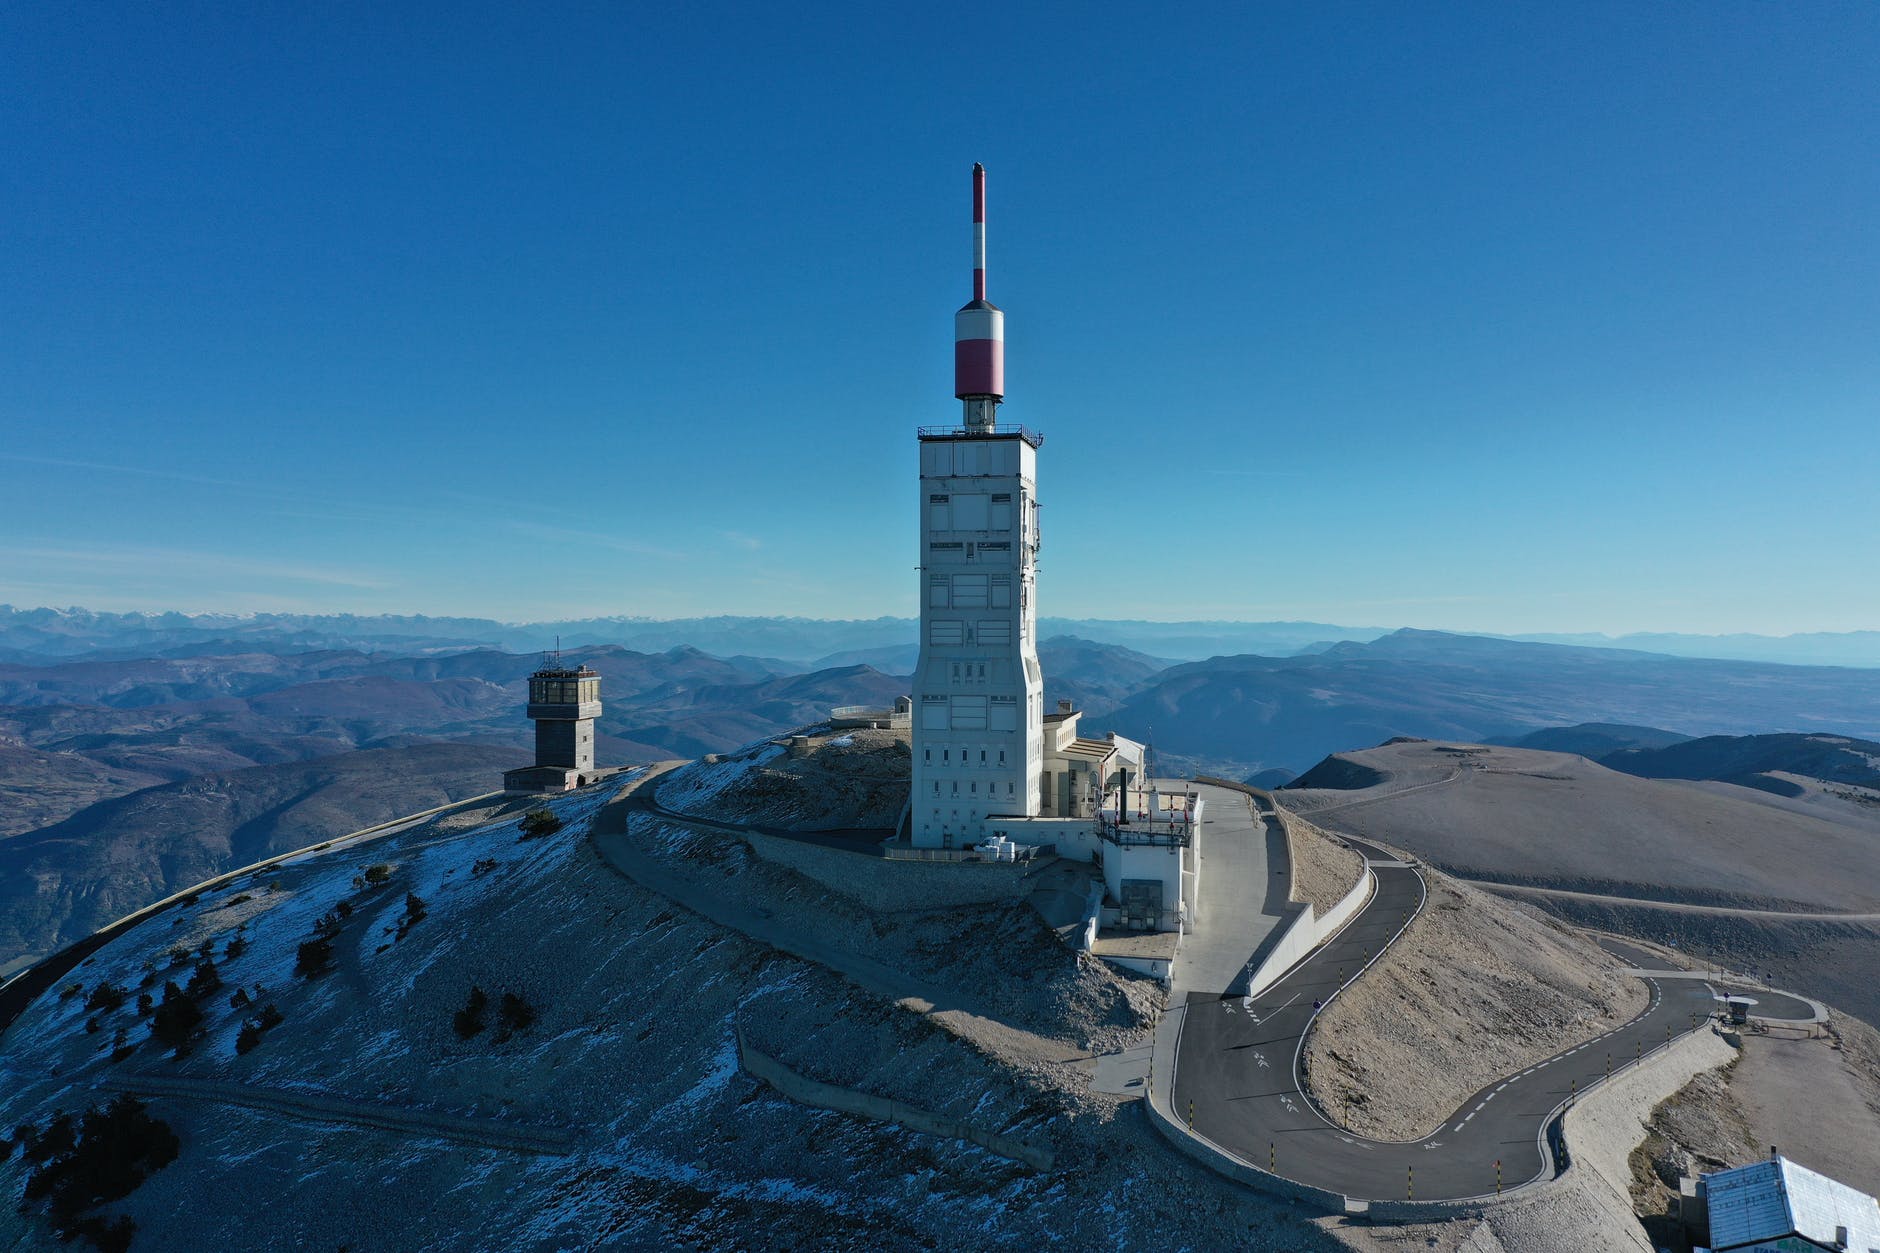 the meteorological tower in mont ventoux vaucluse france